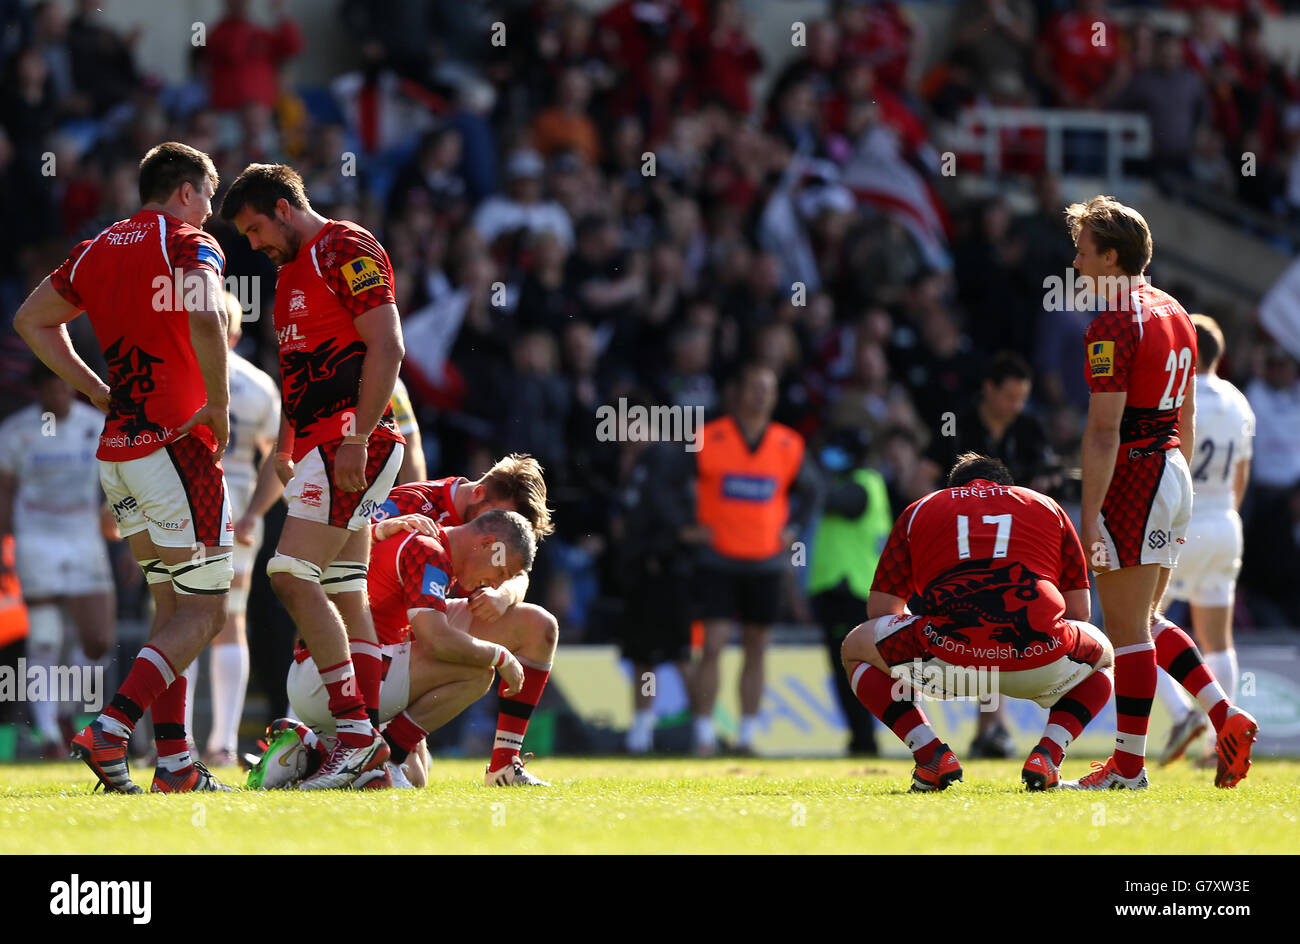 Rugby Union - Aviva Premiership - London Welsh v Saracans - Kassam Stadium. London Welsh appear dejected after the final whistle Stock Photo